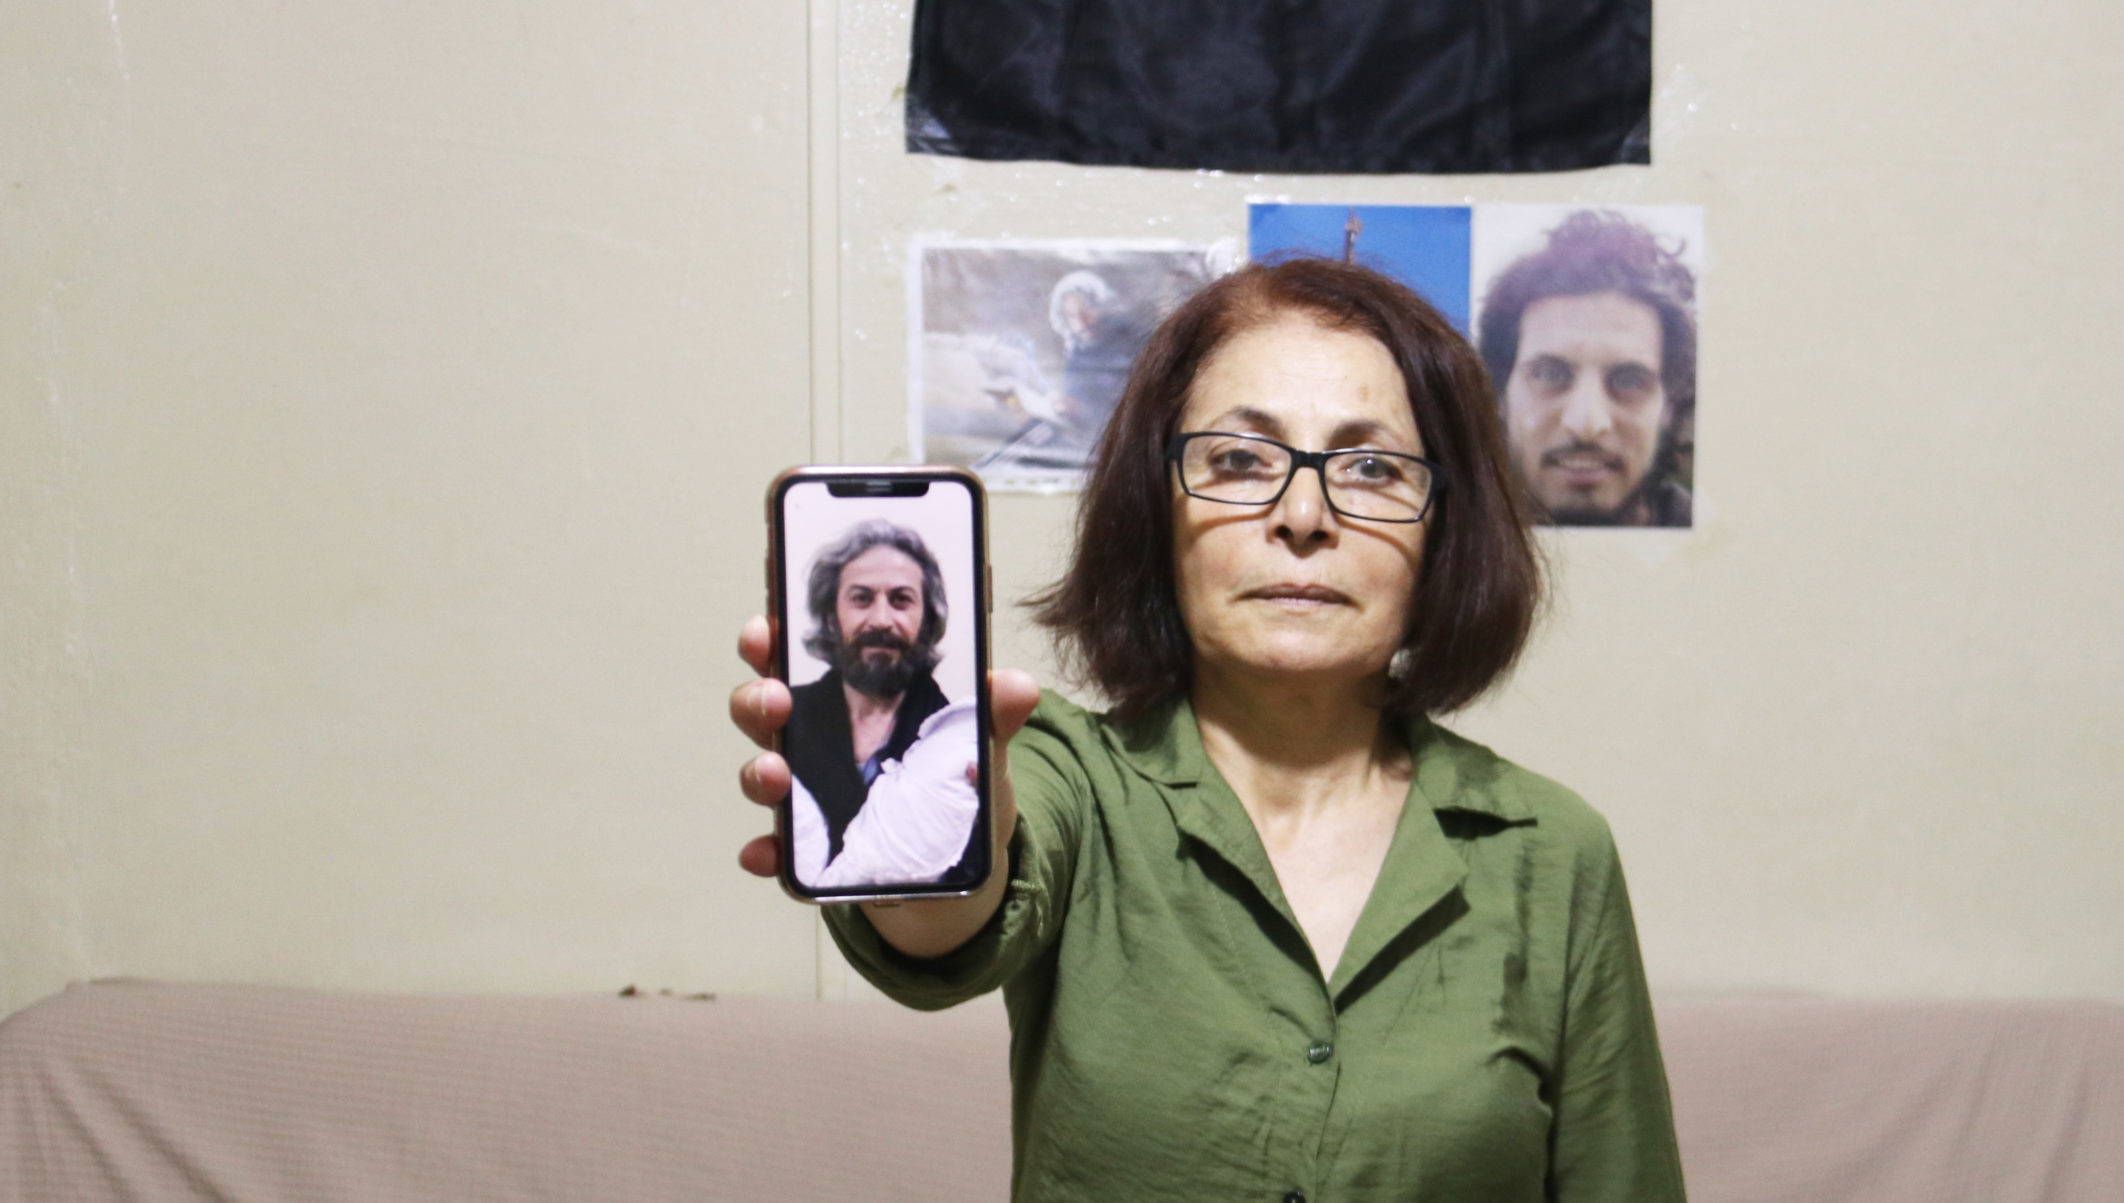 Psychologist Ensaf Nasr’s husband was kidnapped from a maternity centre in Deir Ezzor in 2014